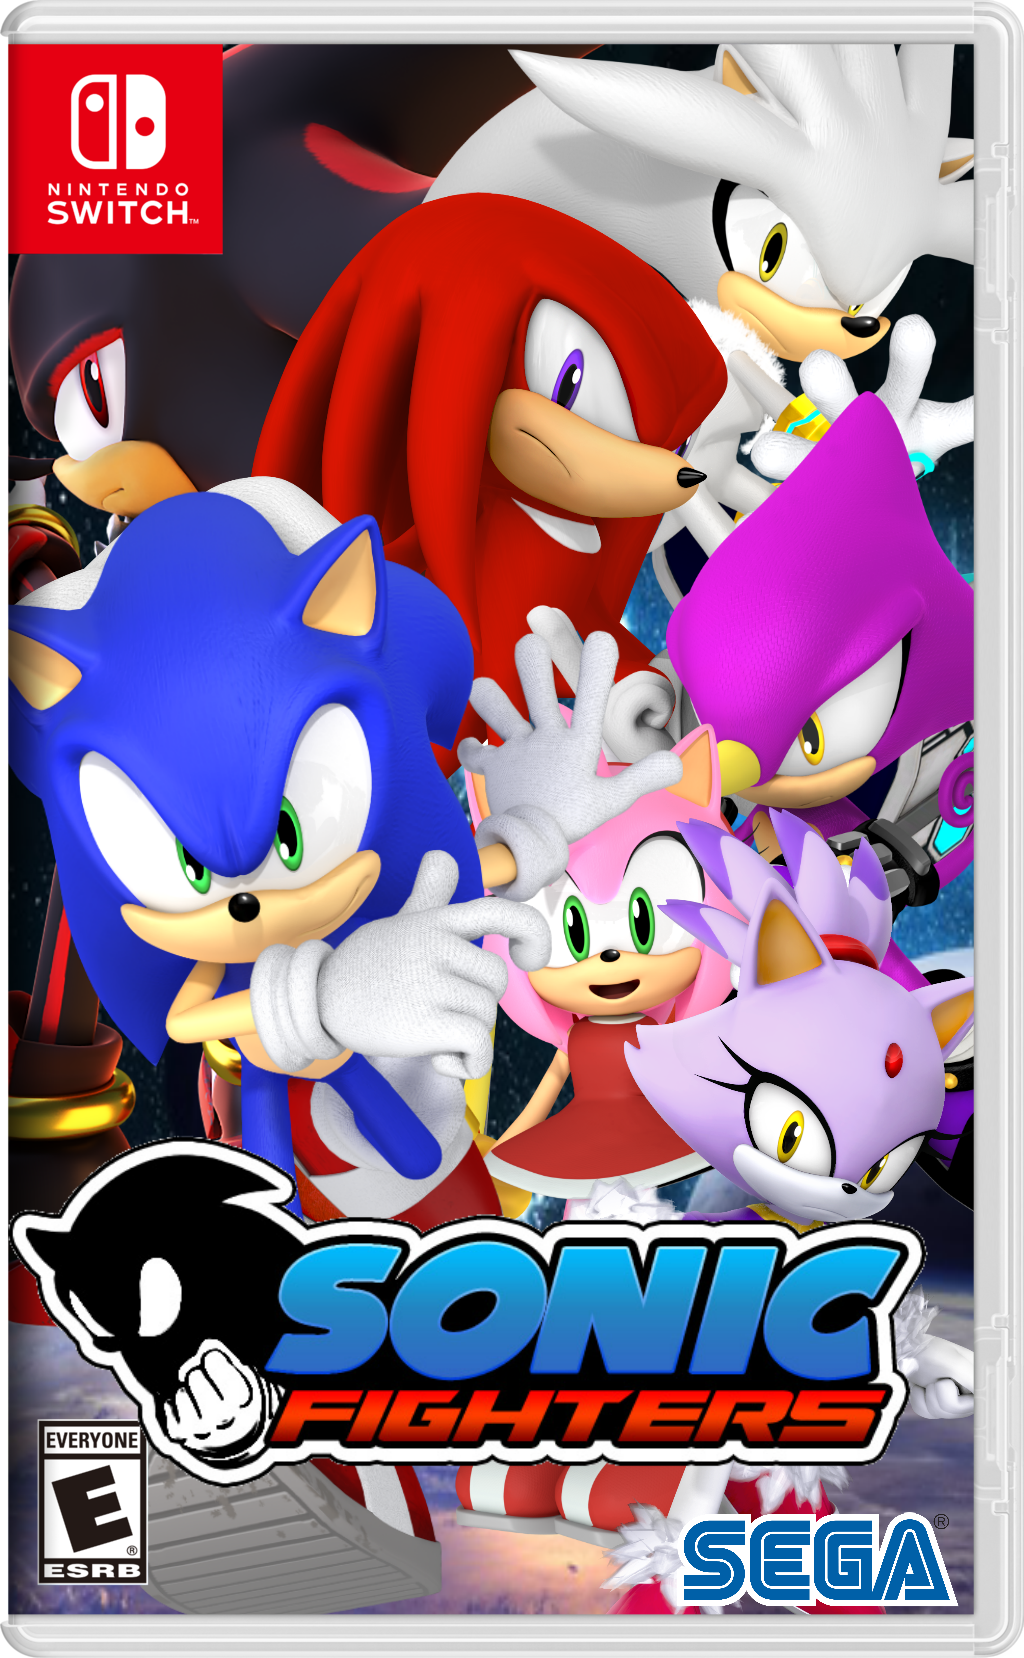 sonic games on switch